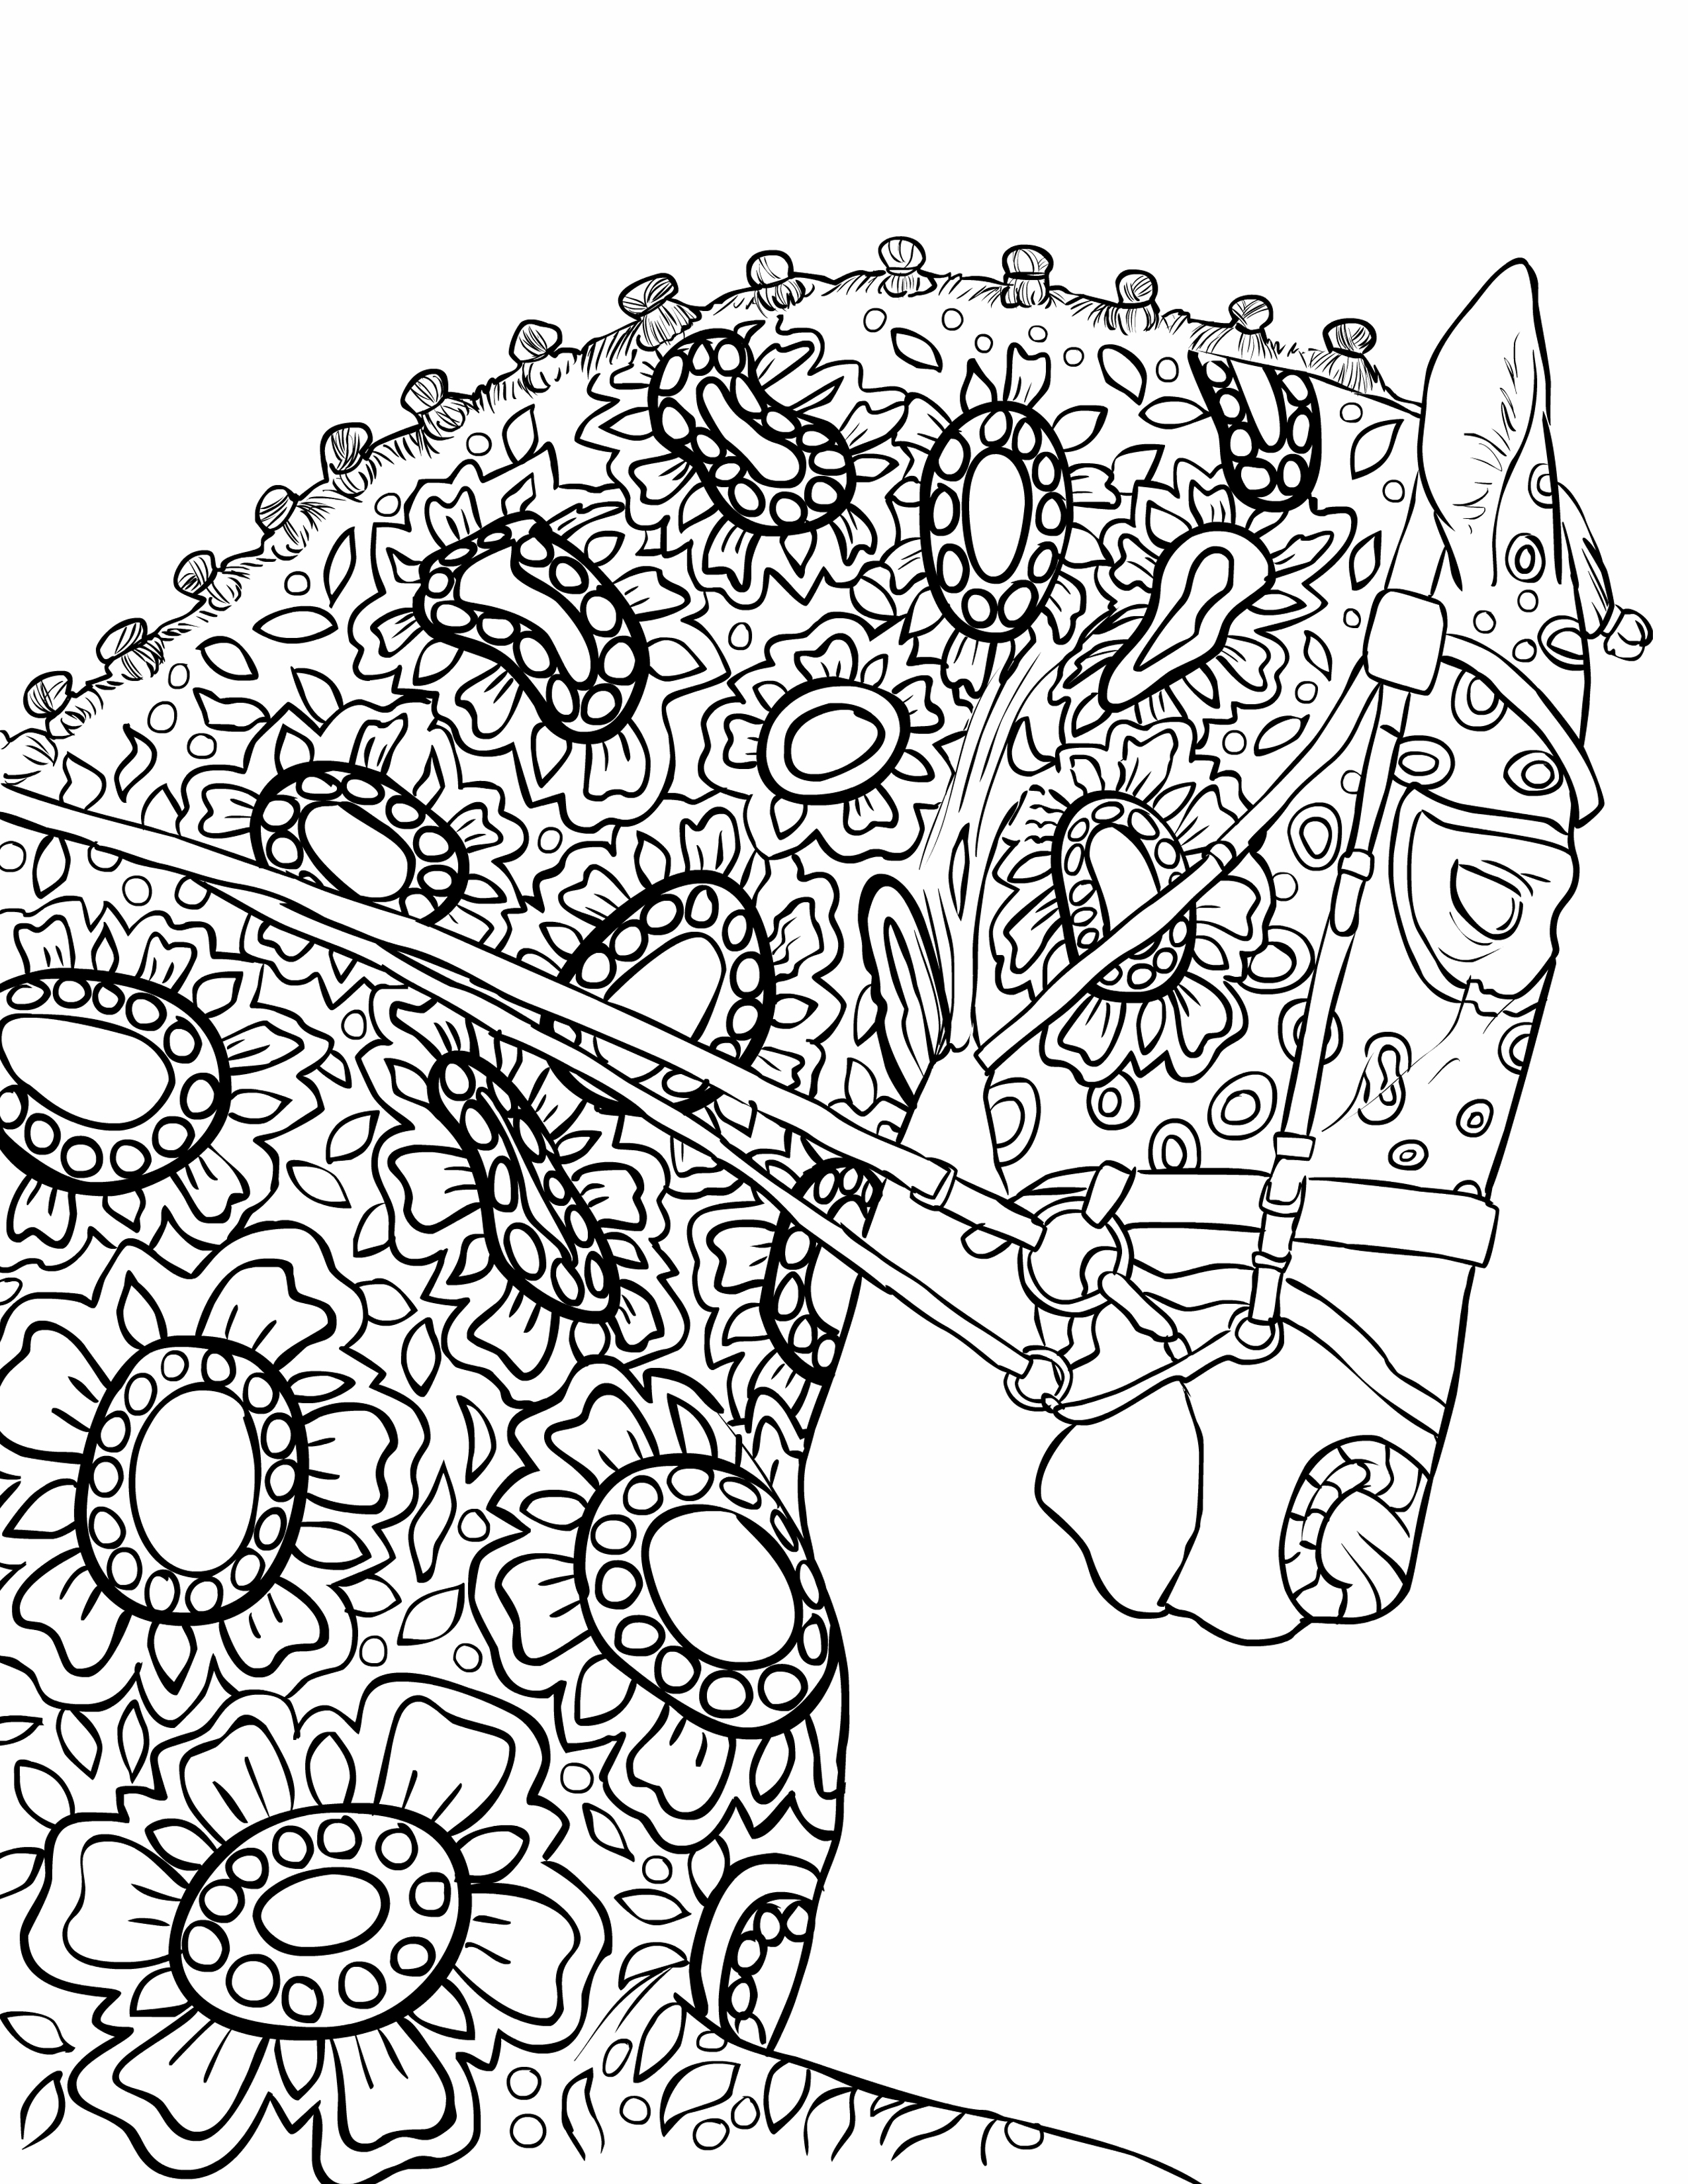 electronic coloring book for adults printable coloring page supply list adult coloring adults electronic book coloring for 